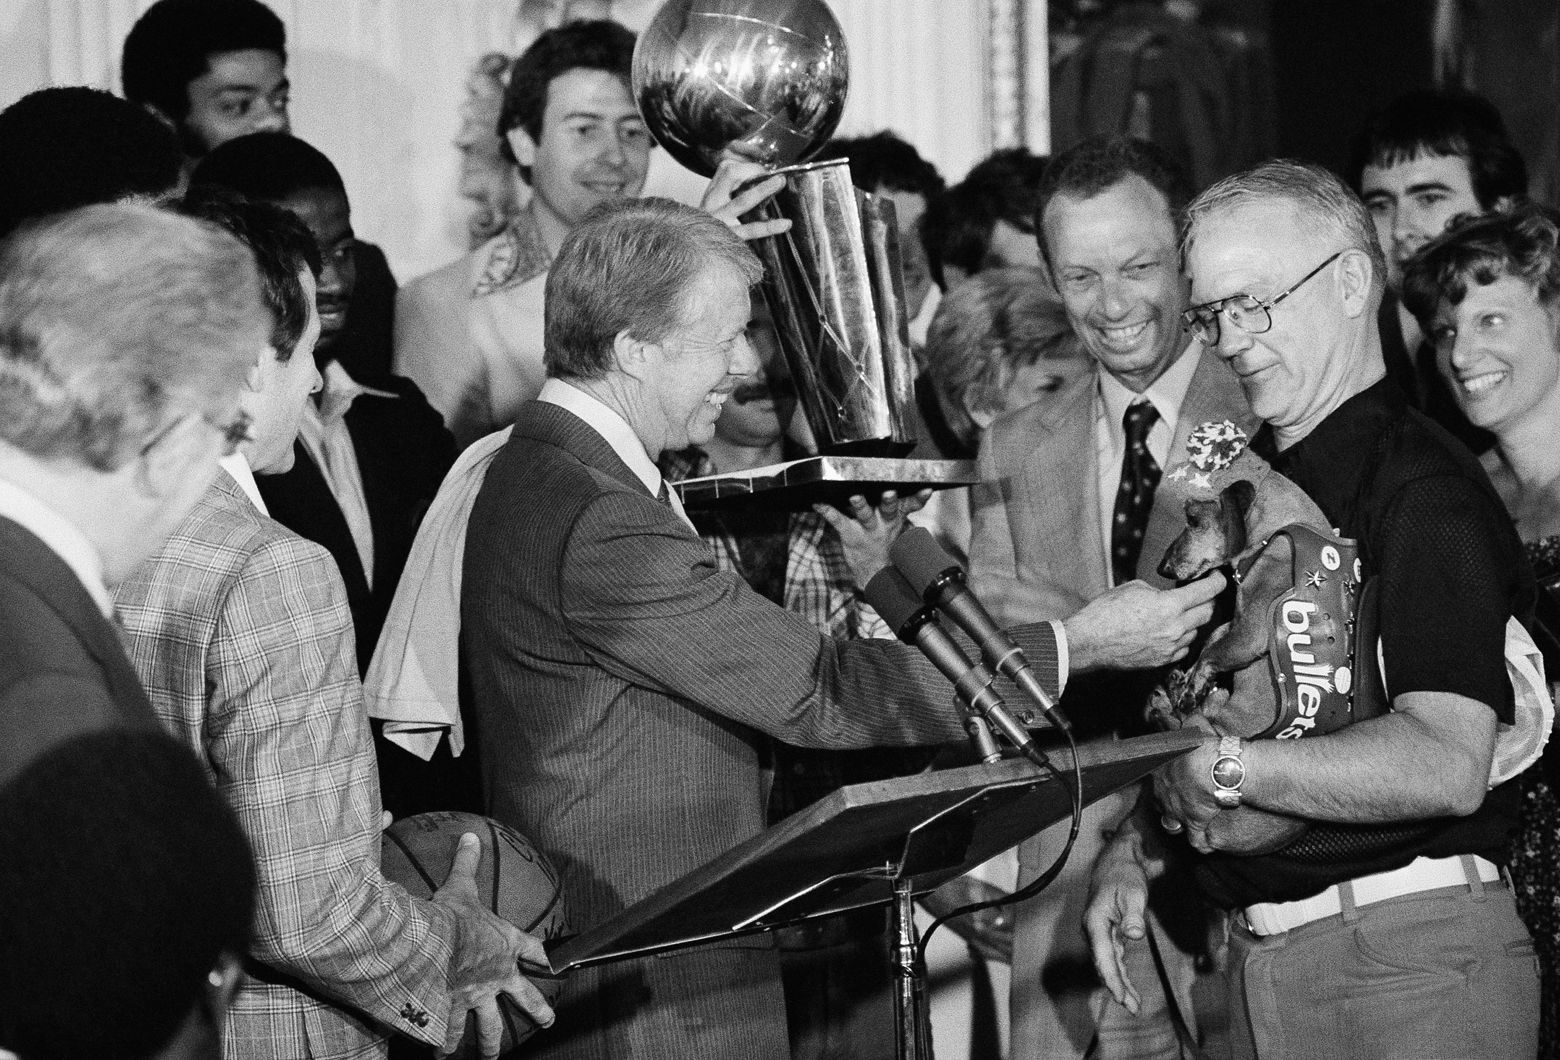 President Carter greets "Tiny," the mascot of NBA champions the Washington Bullets, during a reception for the team and supporters at the White House in Washington on June 10, 1978. (AP Photo/Barry Thumma)